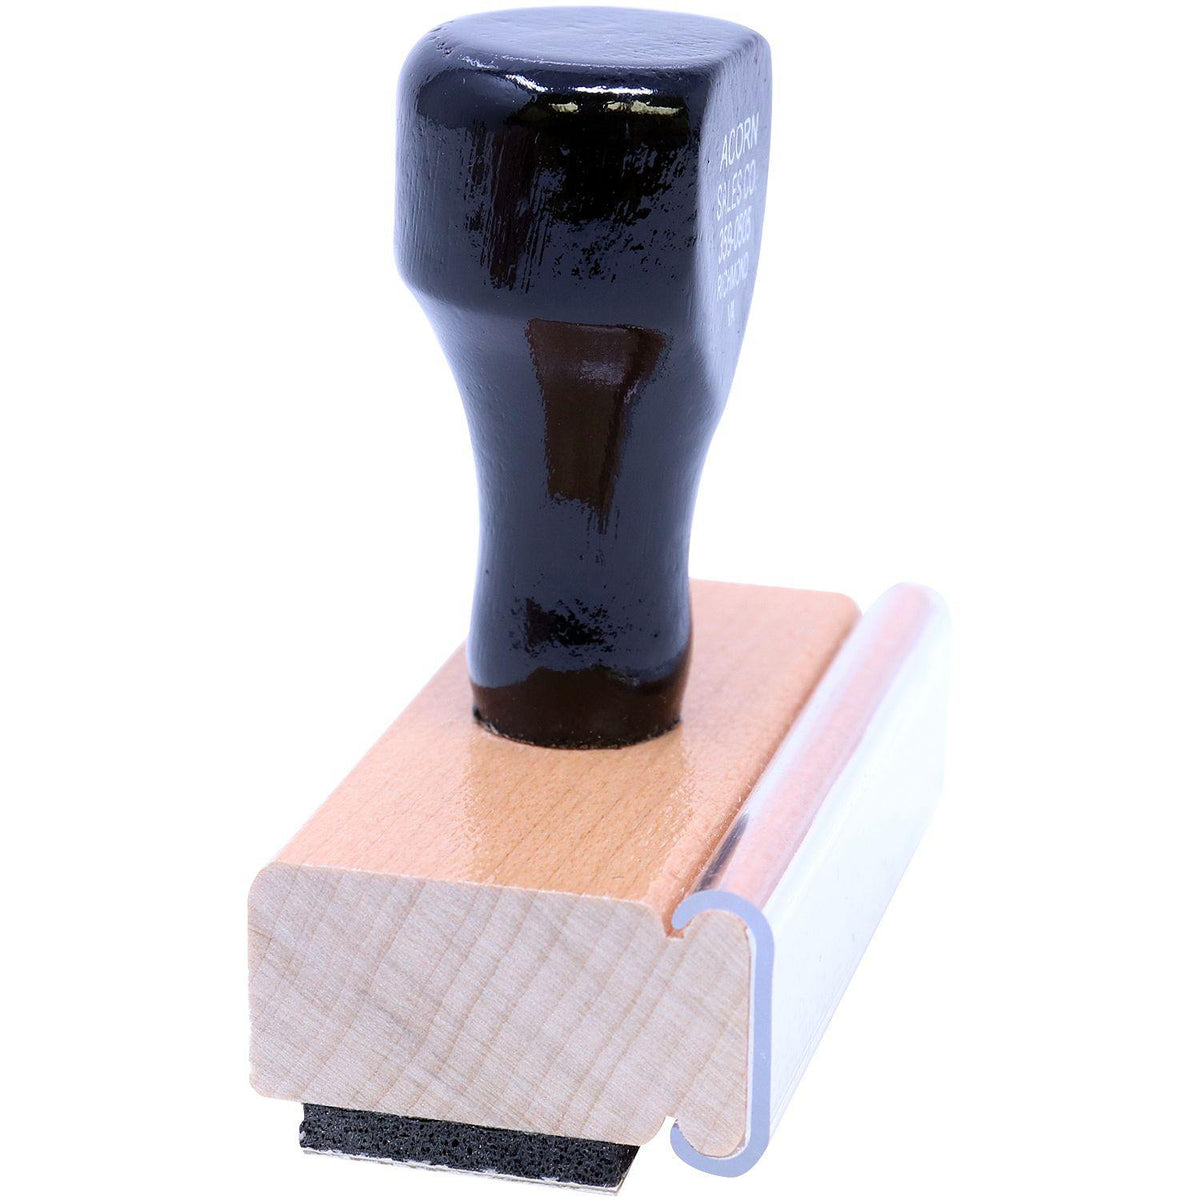 Side View of Large Excellent Work Rubber Stamp at an Angle